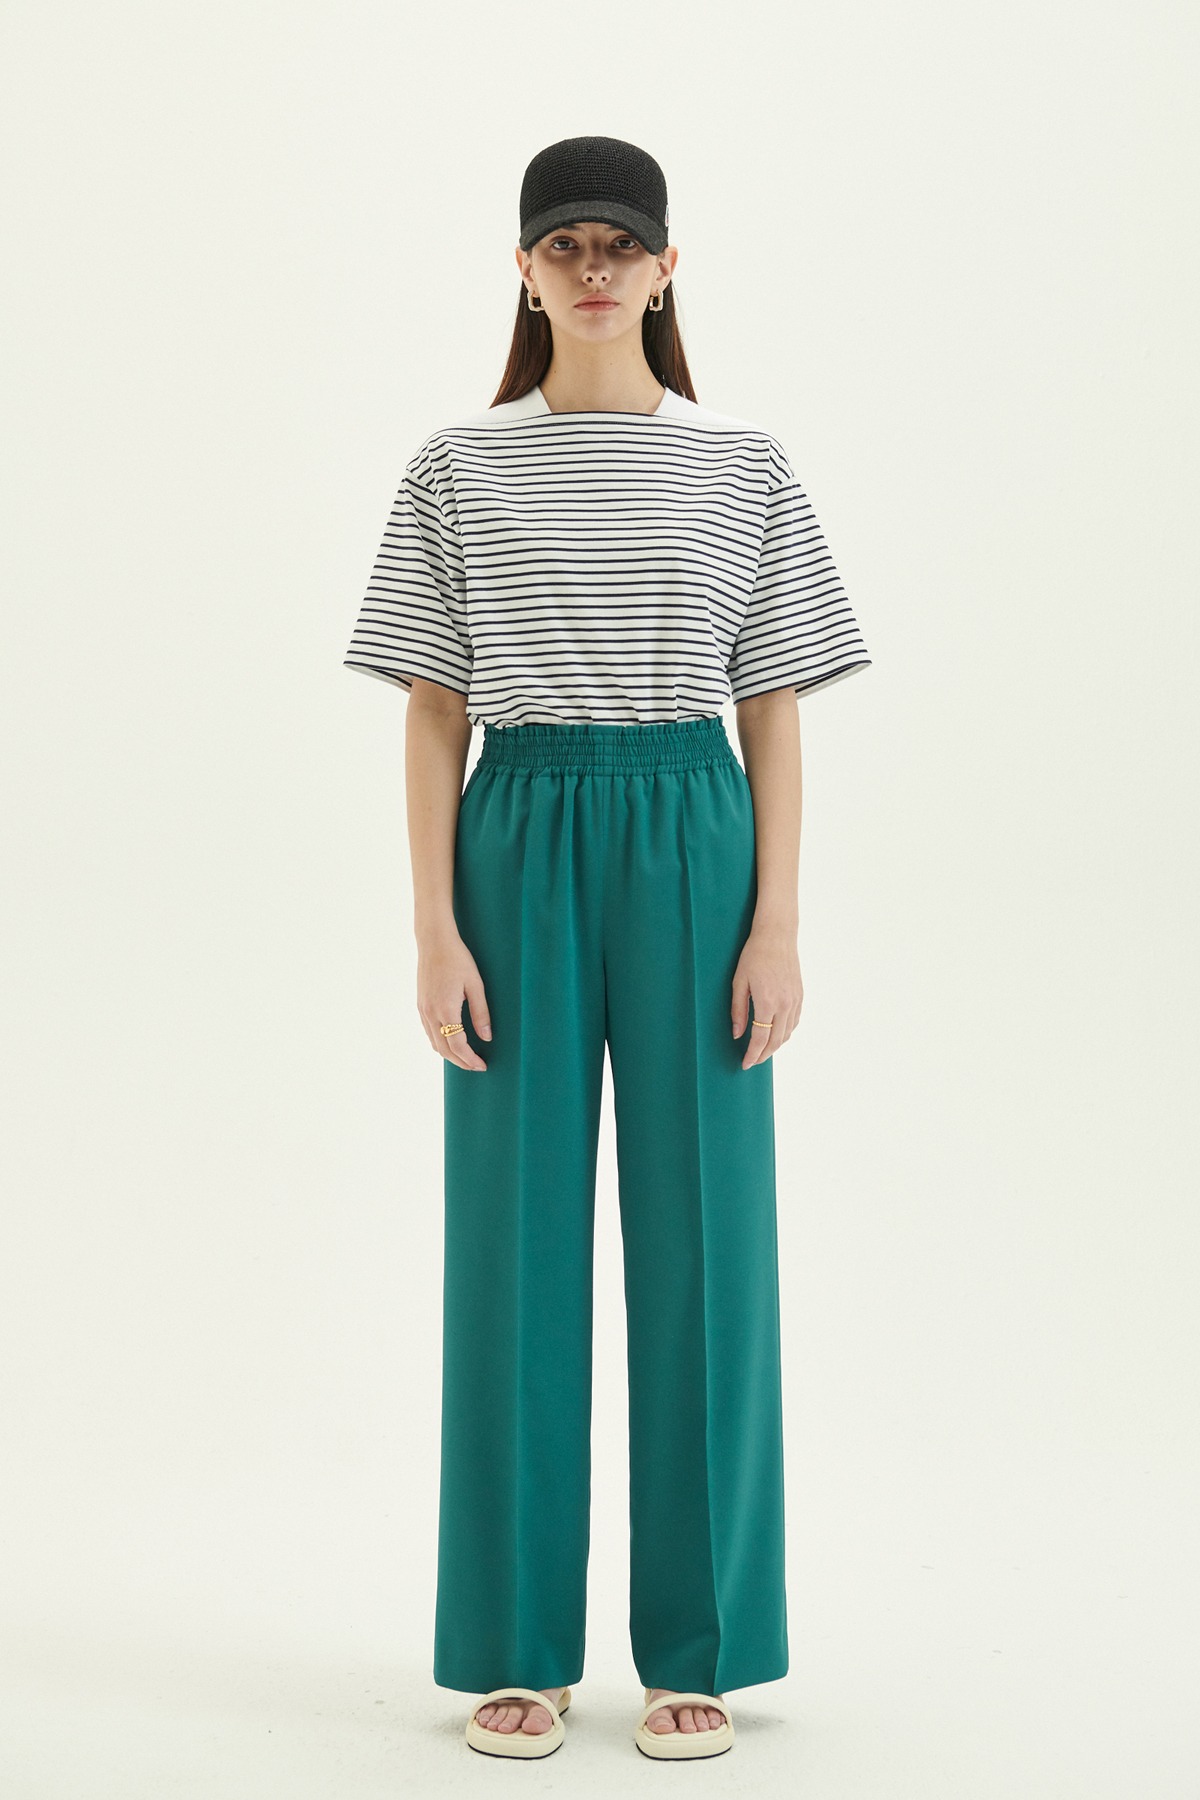 Waist Banded Straight Trousers Turquoise